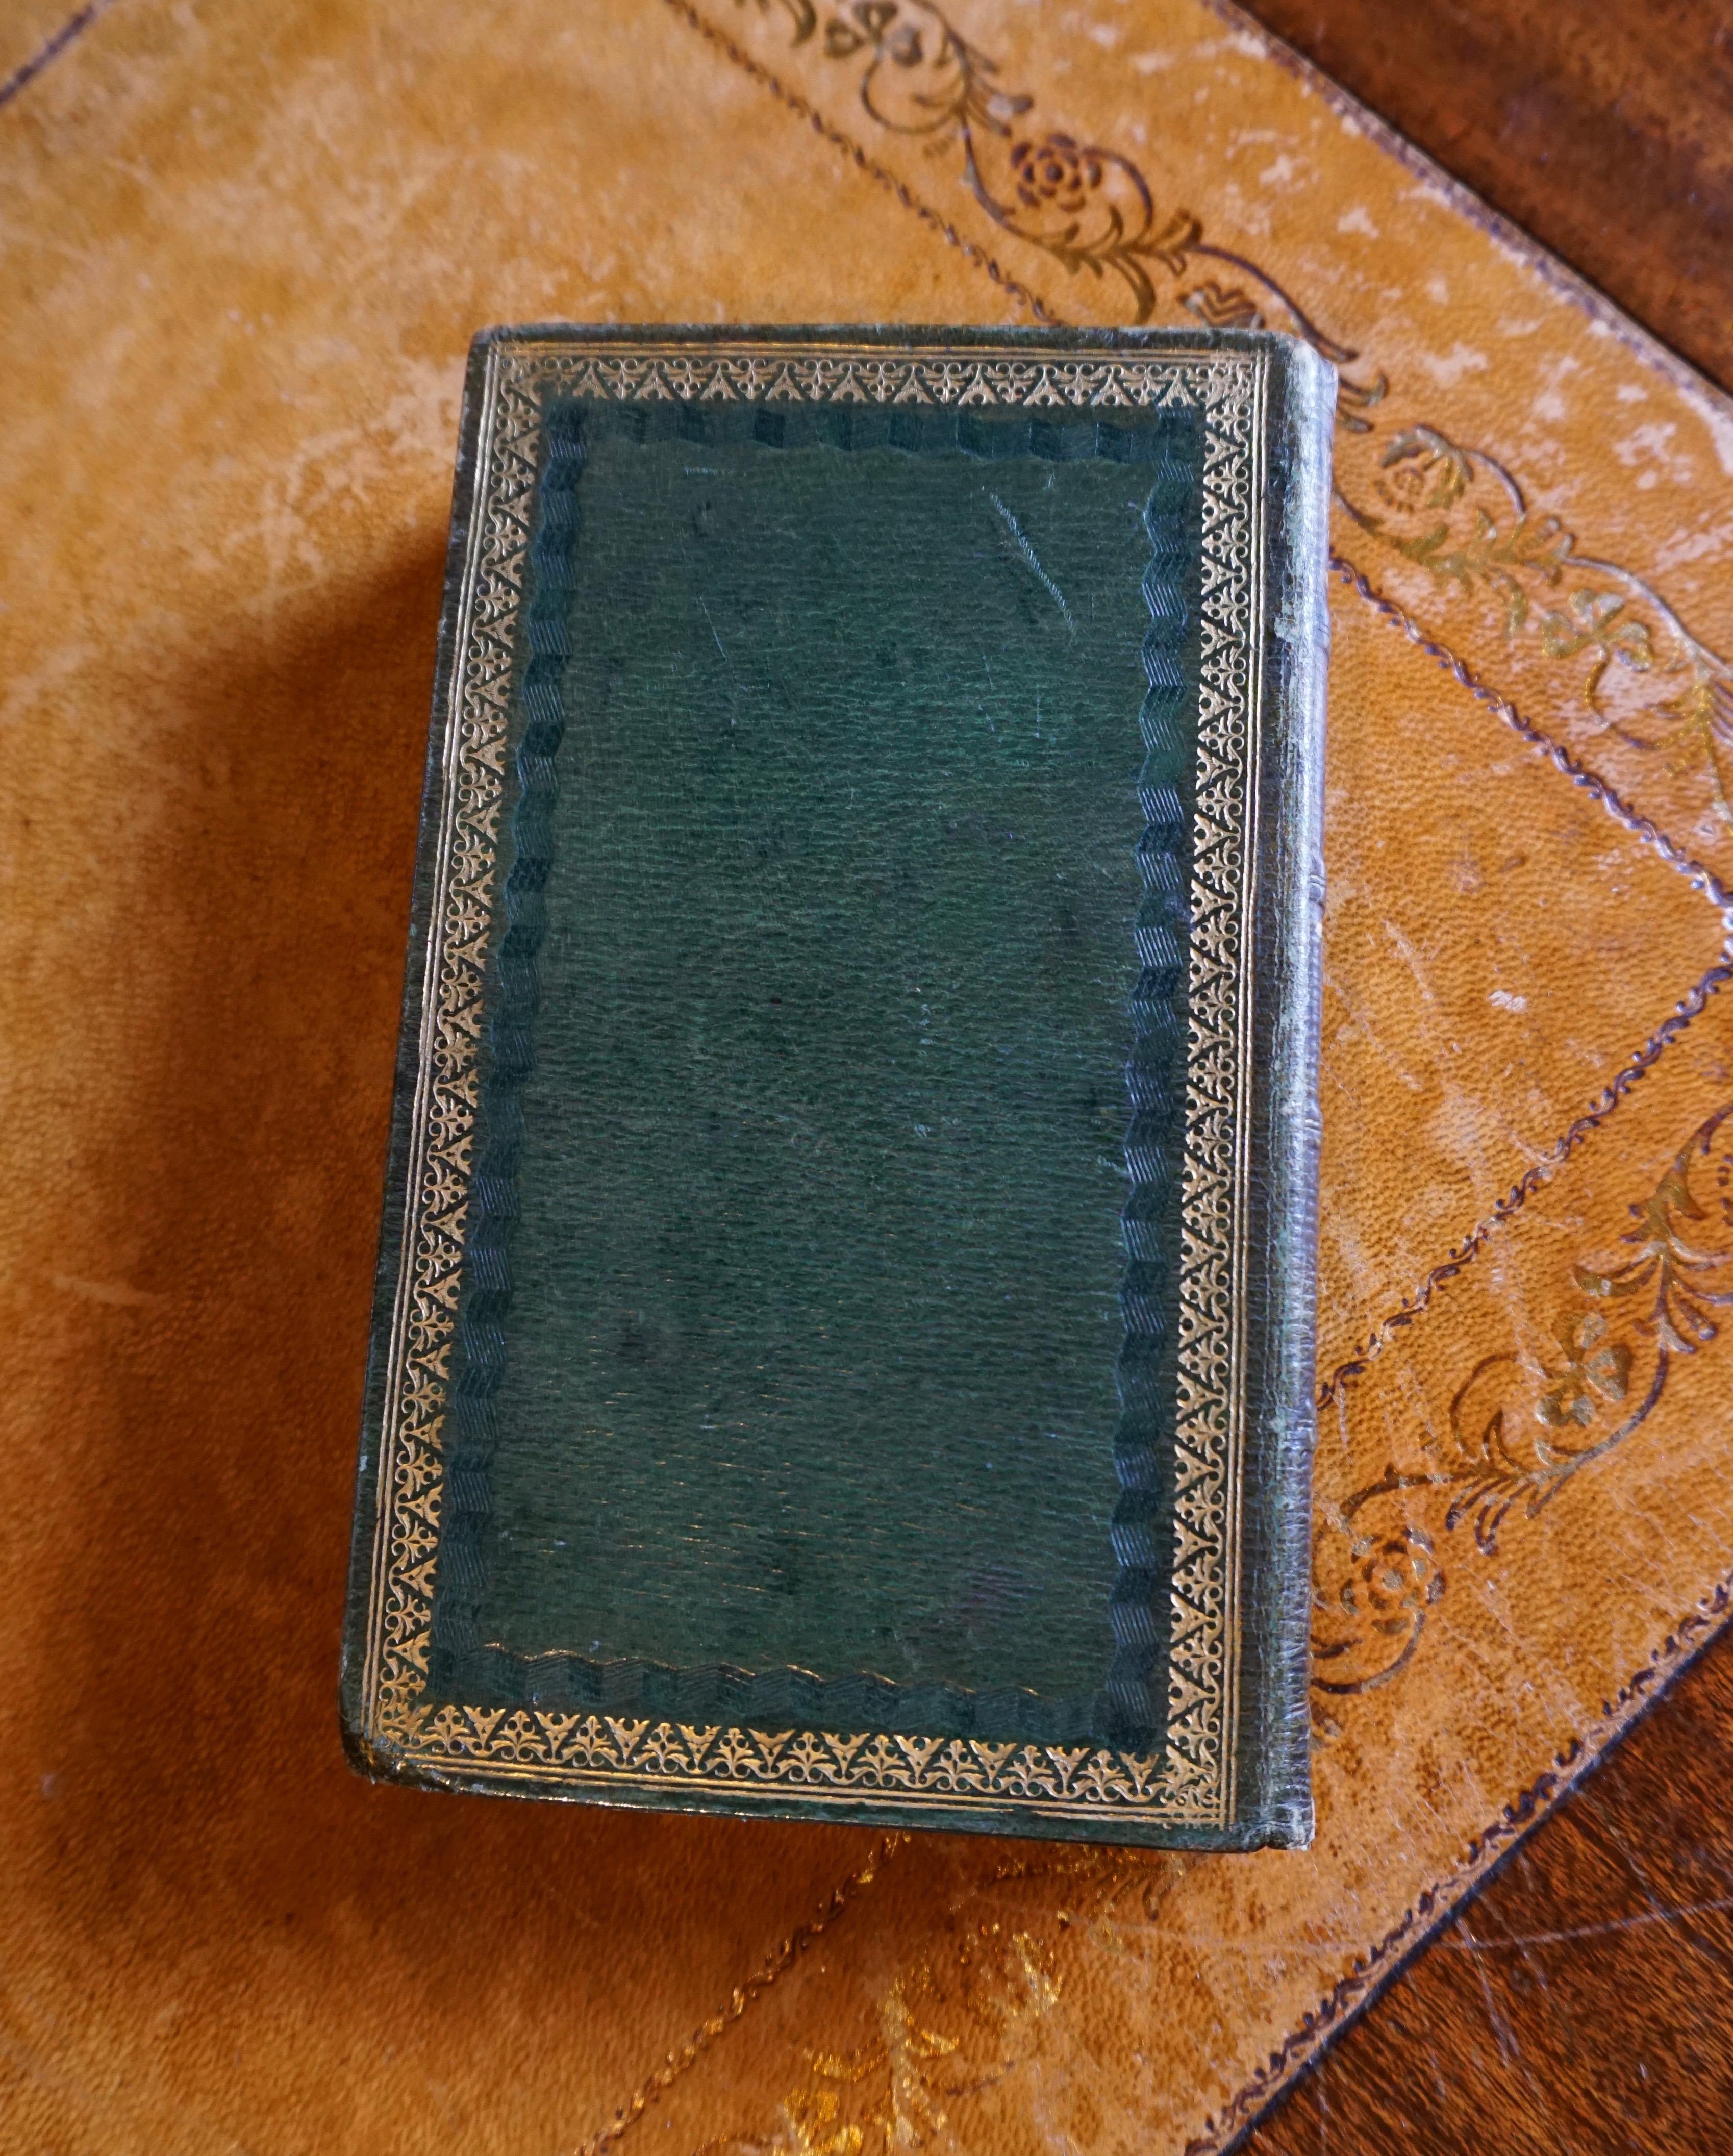 19th Century Scott's Historical Works Novels and Romances in Full Leather Bindings